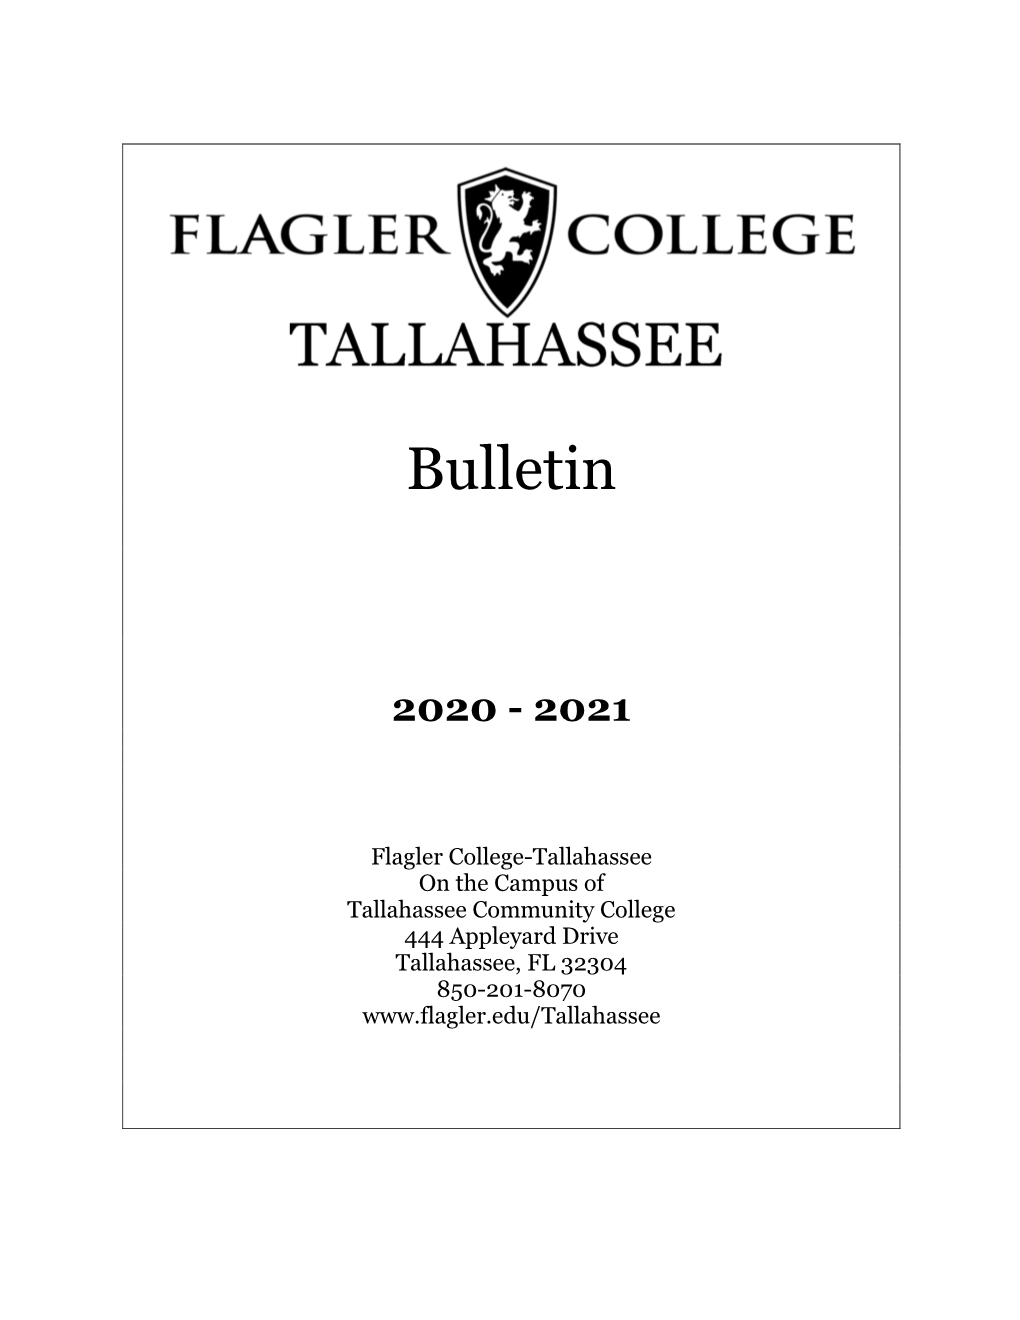 Flagler College-Tallahassee on the Campus of Tallahassee Community College 444 Appleyard Drive Tallahassee, FL 32304 850-201-8070